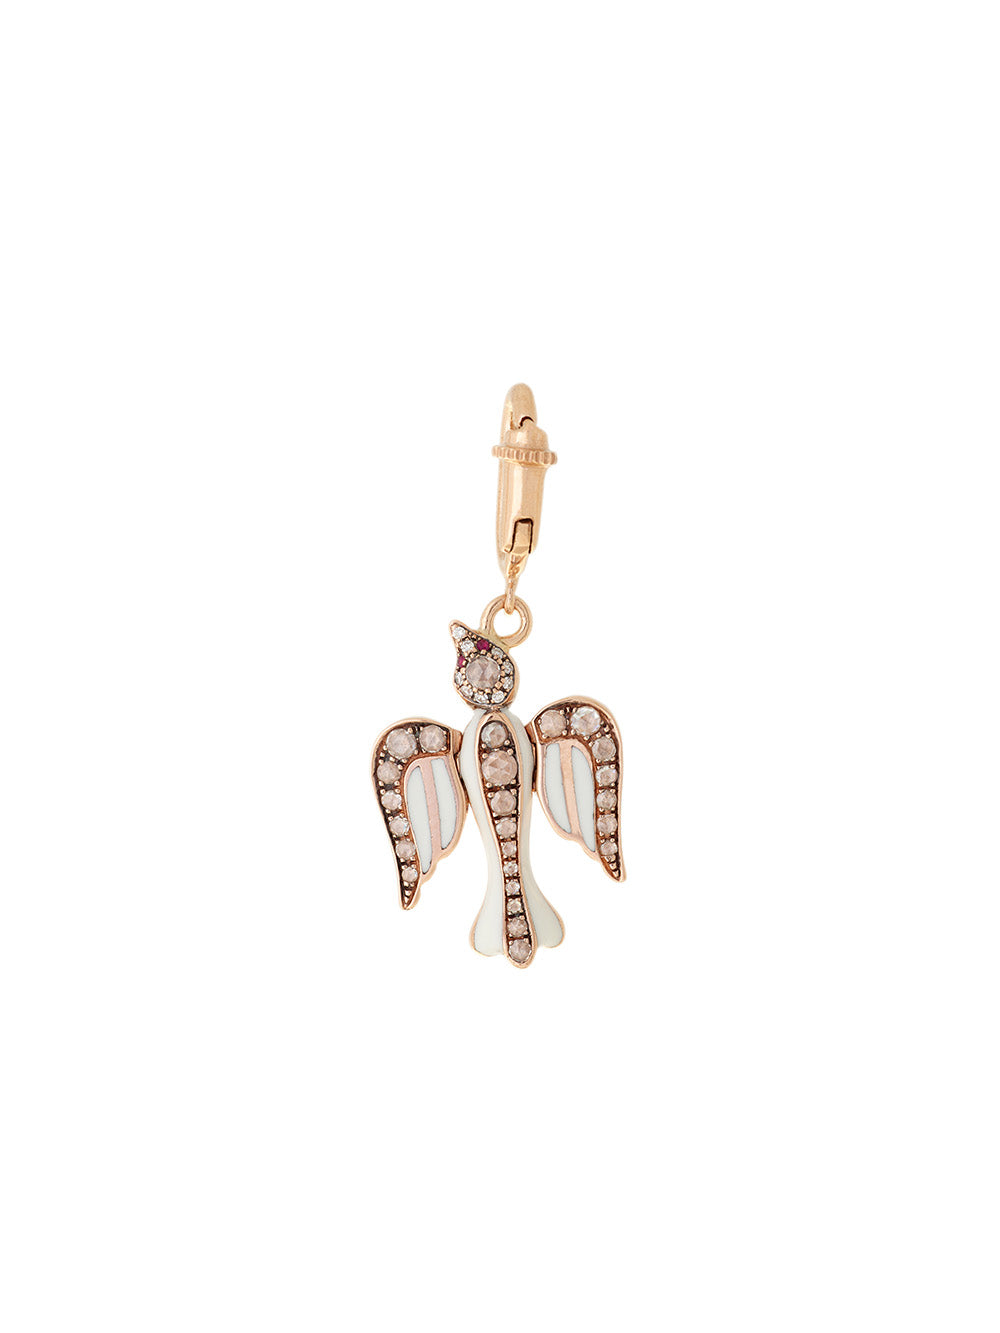 CHARM COLOMBE OR ROSE, DIAMANTS ET EMAIL IVOIRE